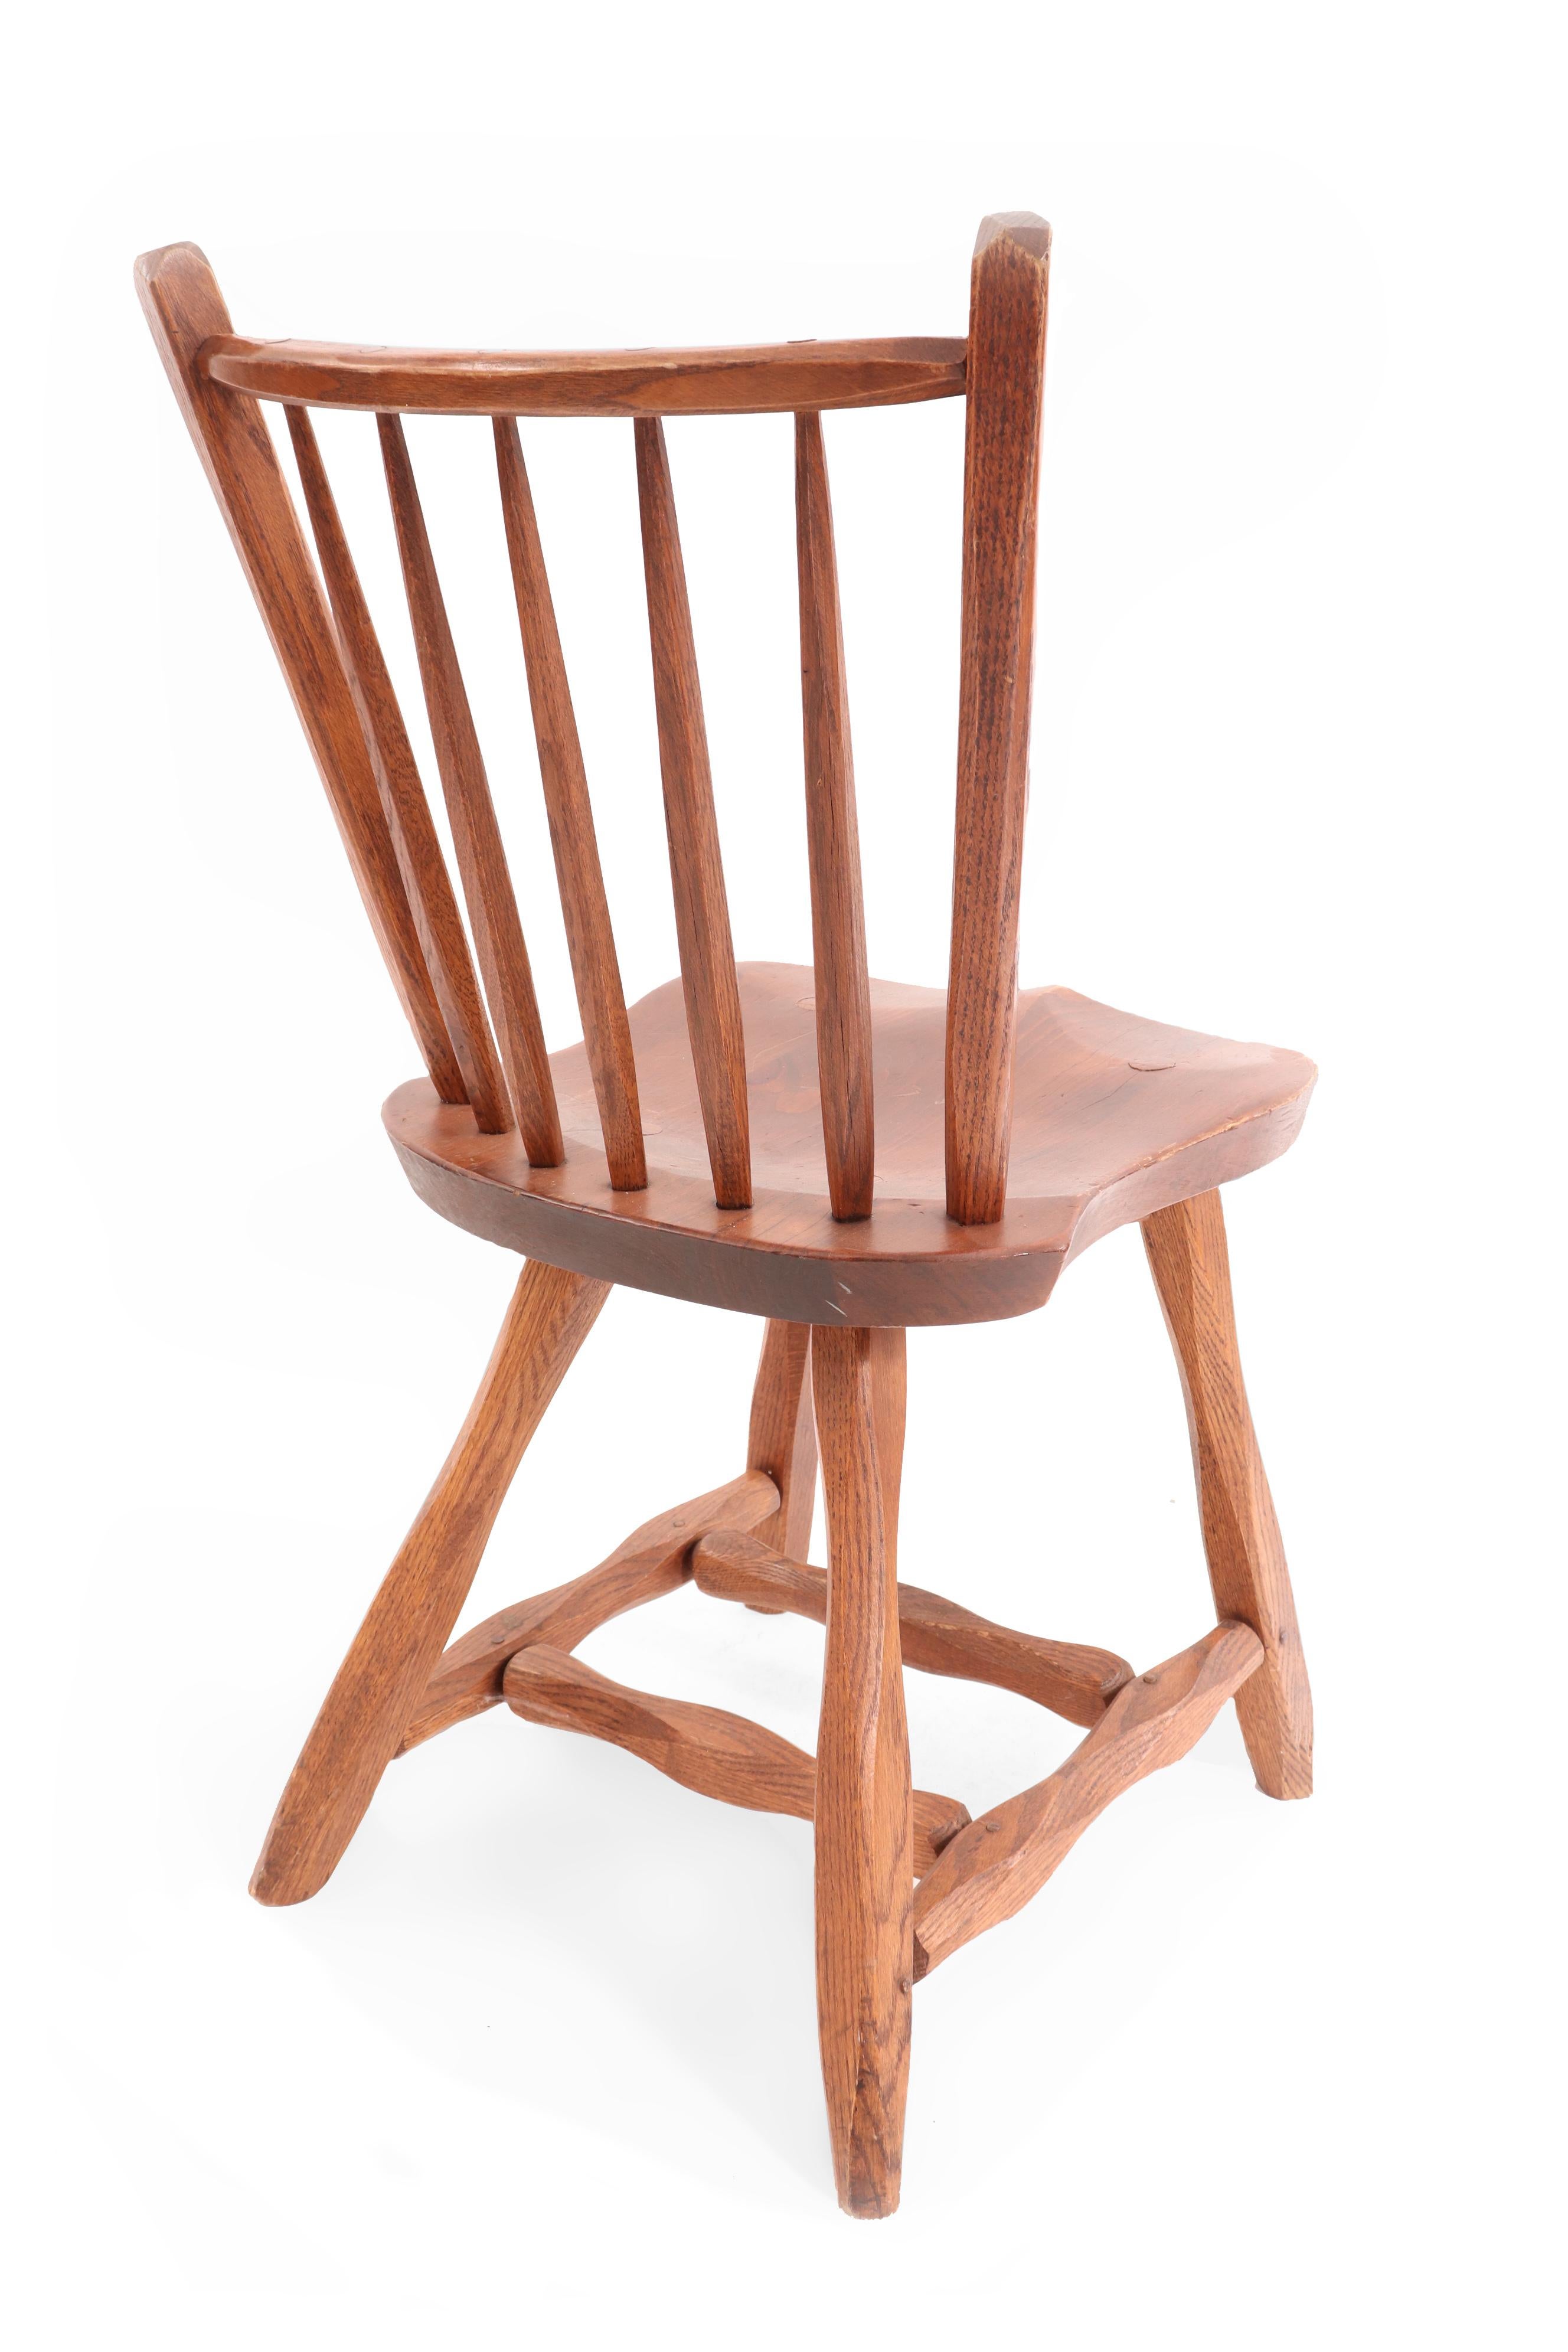 American 7 Wooden Windsor Style Dining Chairs